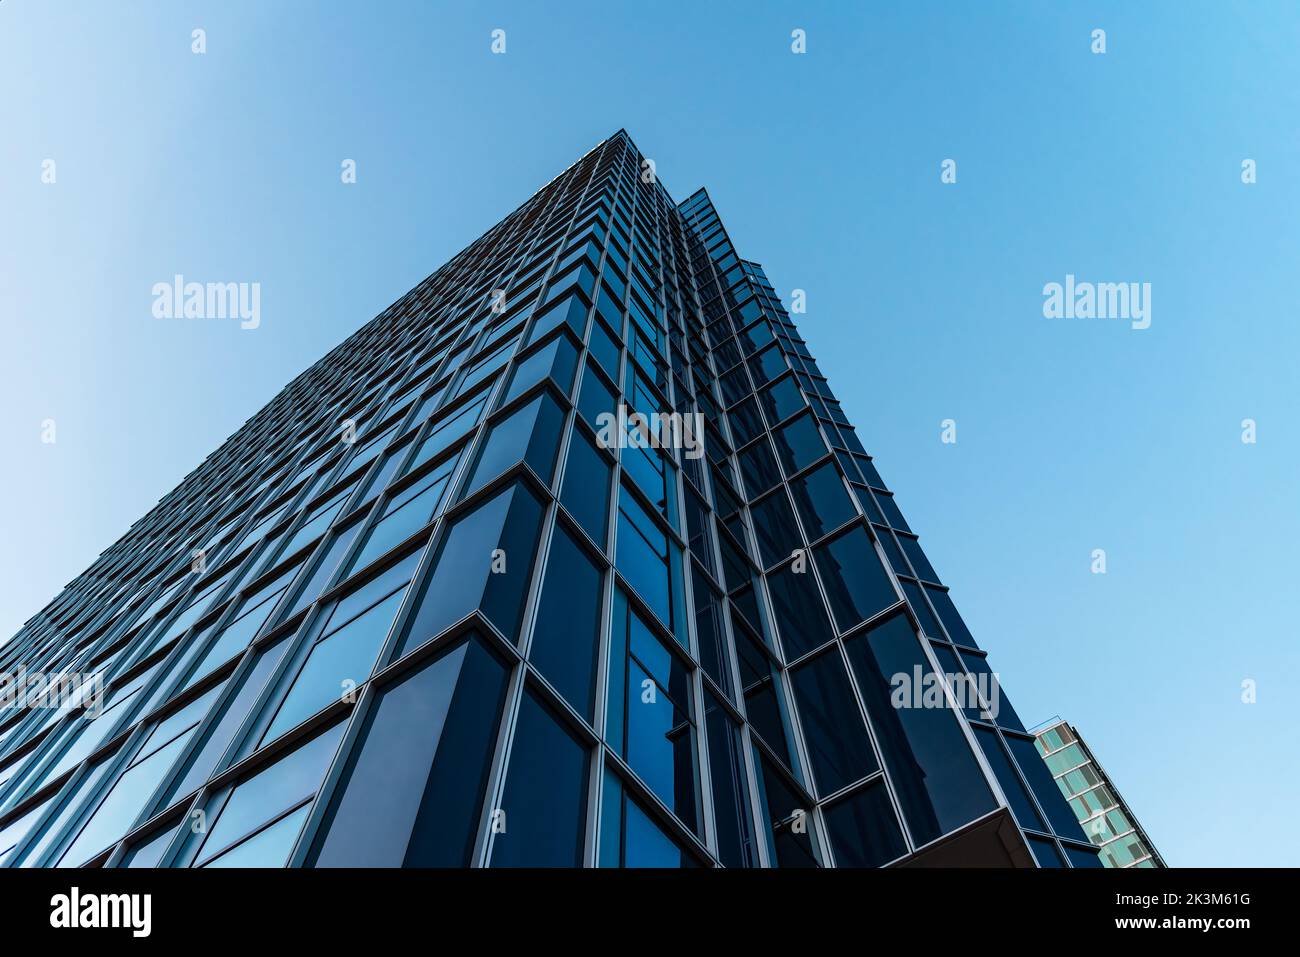 Amsterdam, Netherlands - May 7, 2022: Skyscraper against sky. Contemporary architecture, blue colors. Low angle view Stock Photo